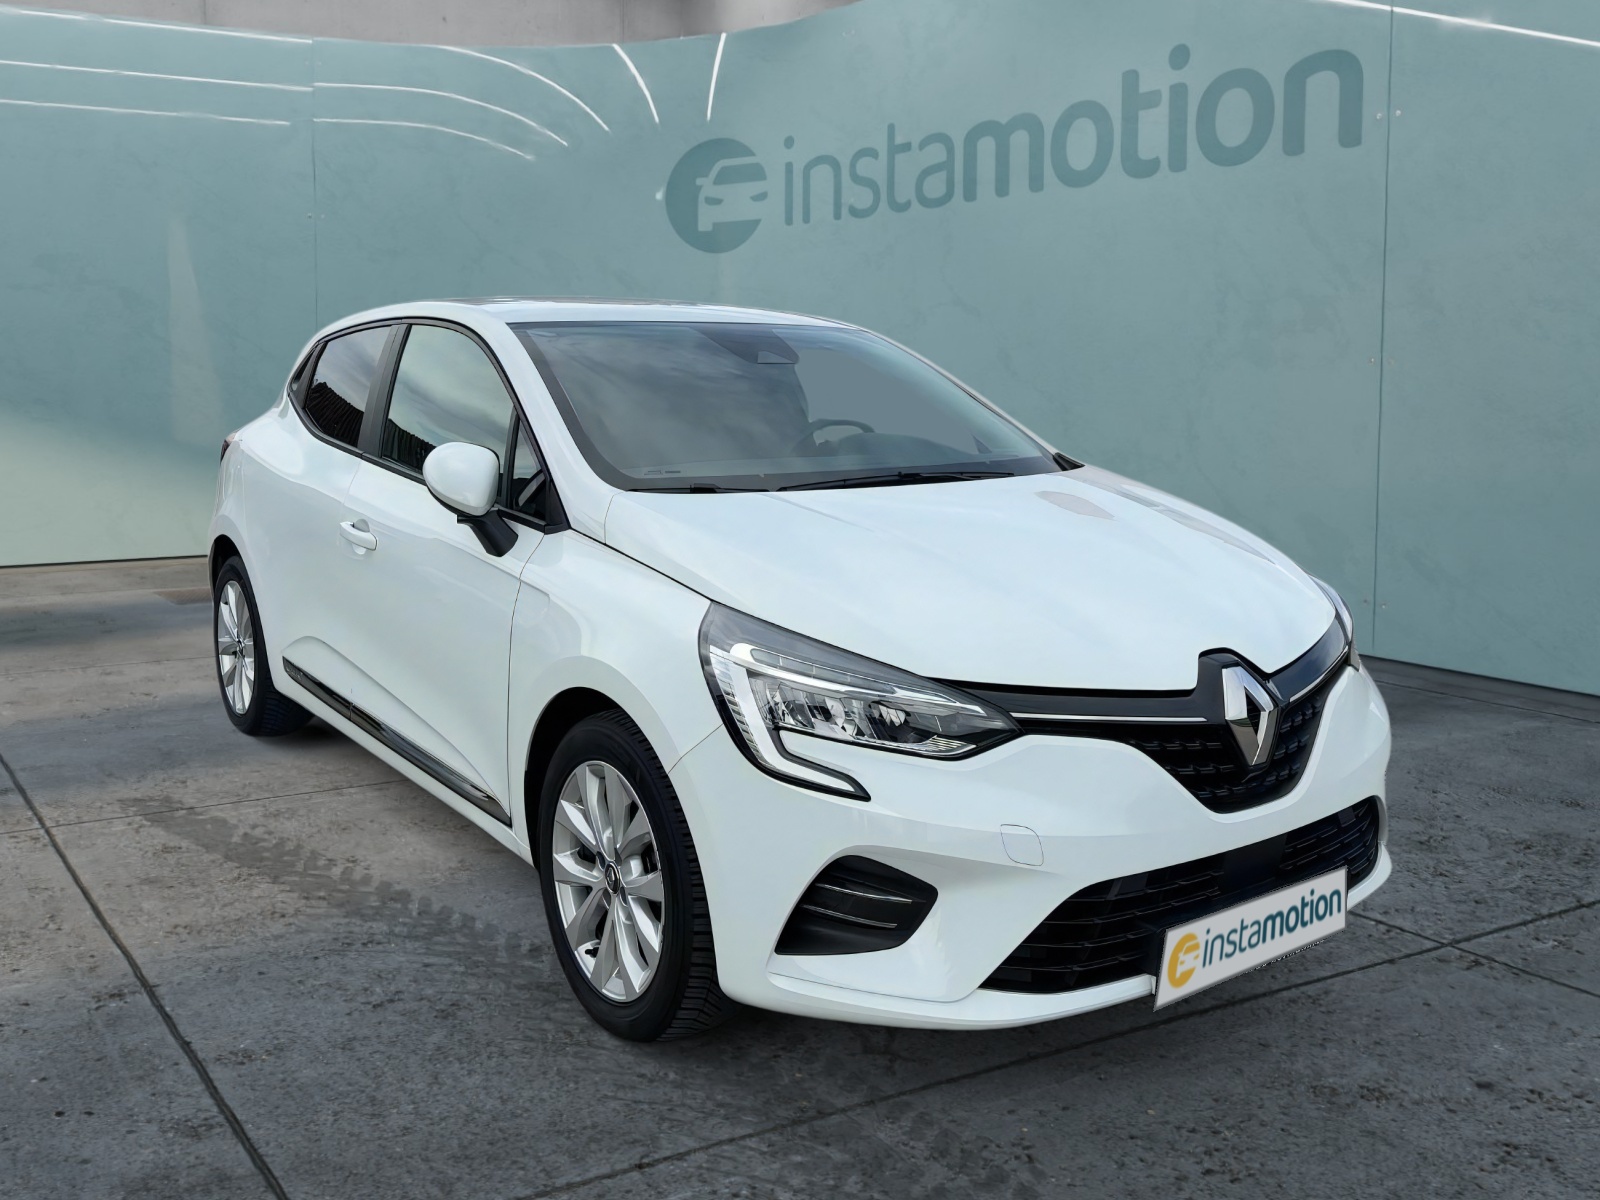 Renault Clio 1.0 V TCe 100 Experience